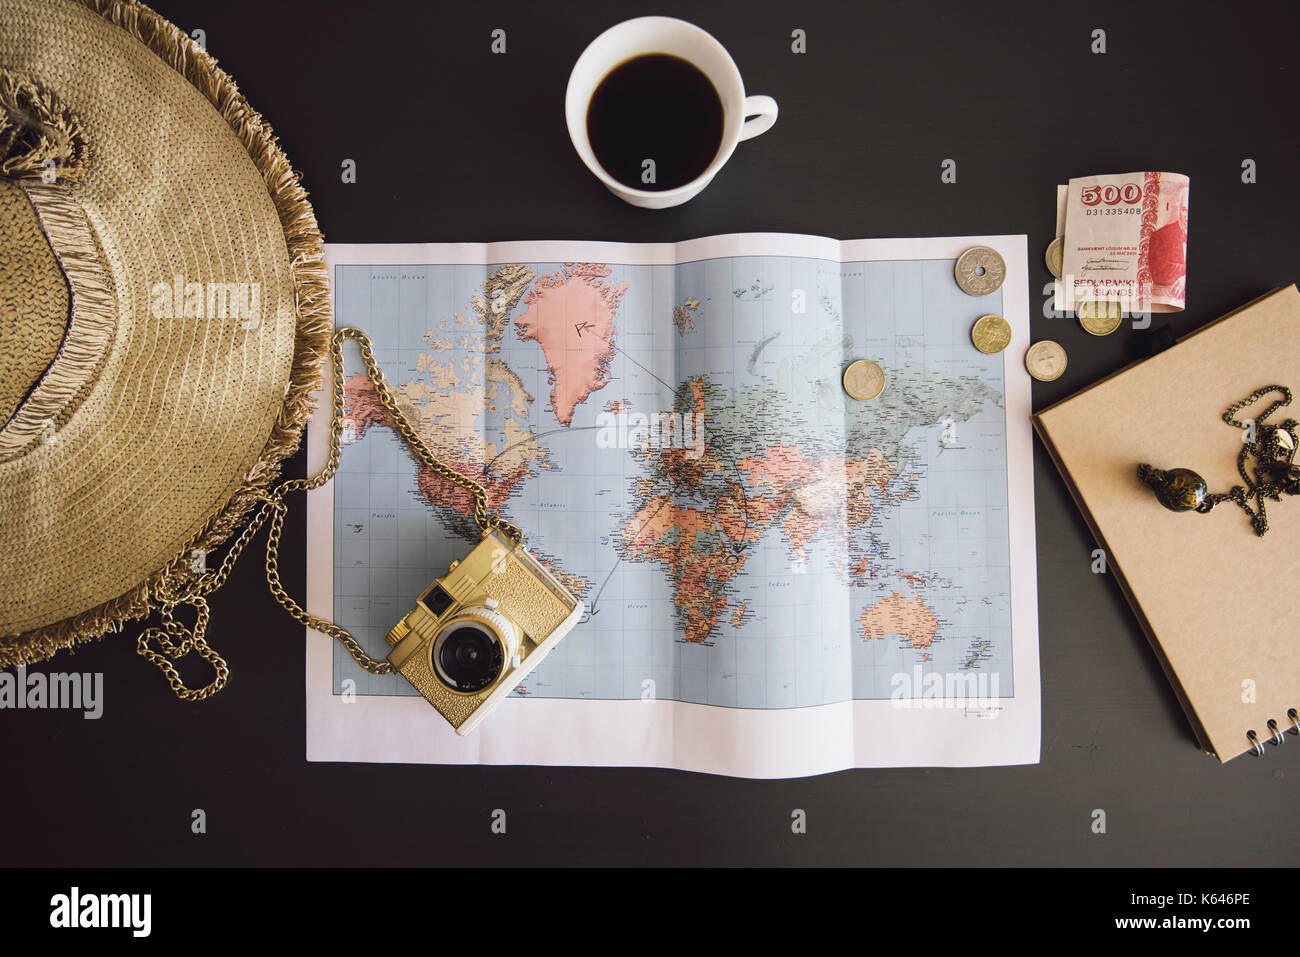 Planning the trip. World map with the hat, film camera, some money, notebook from recycled paper and freshly brewed coffee cup on the dark table Stock Photo